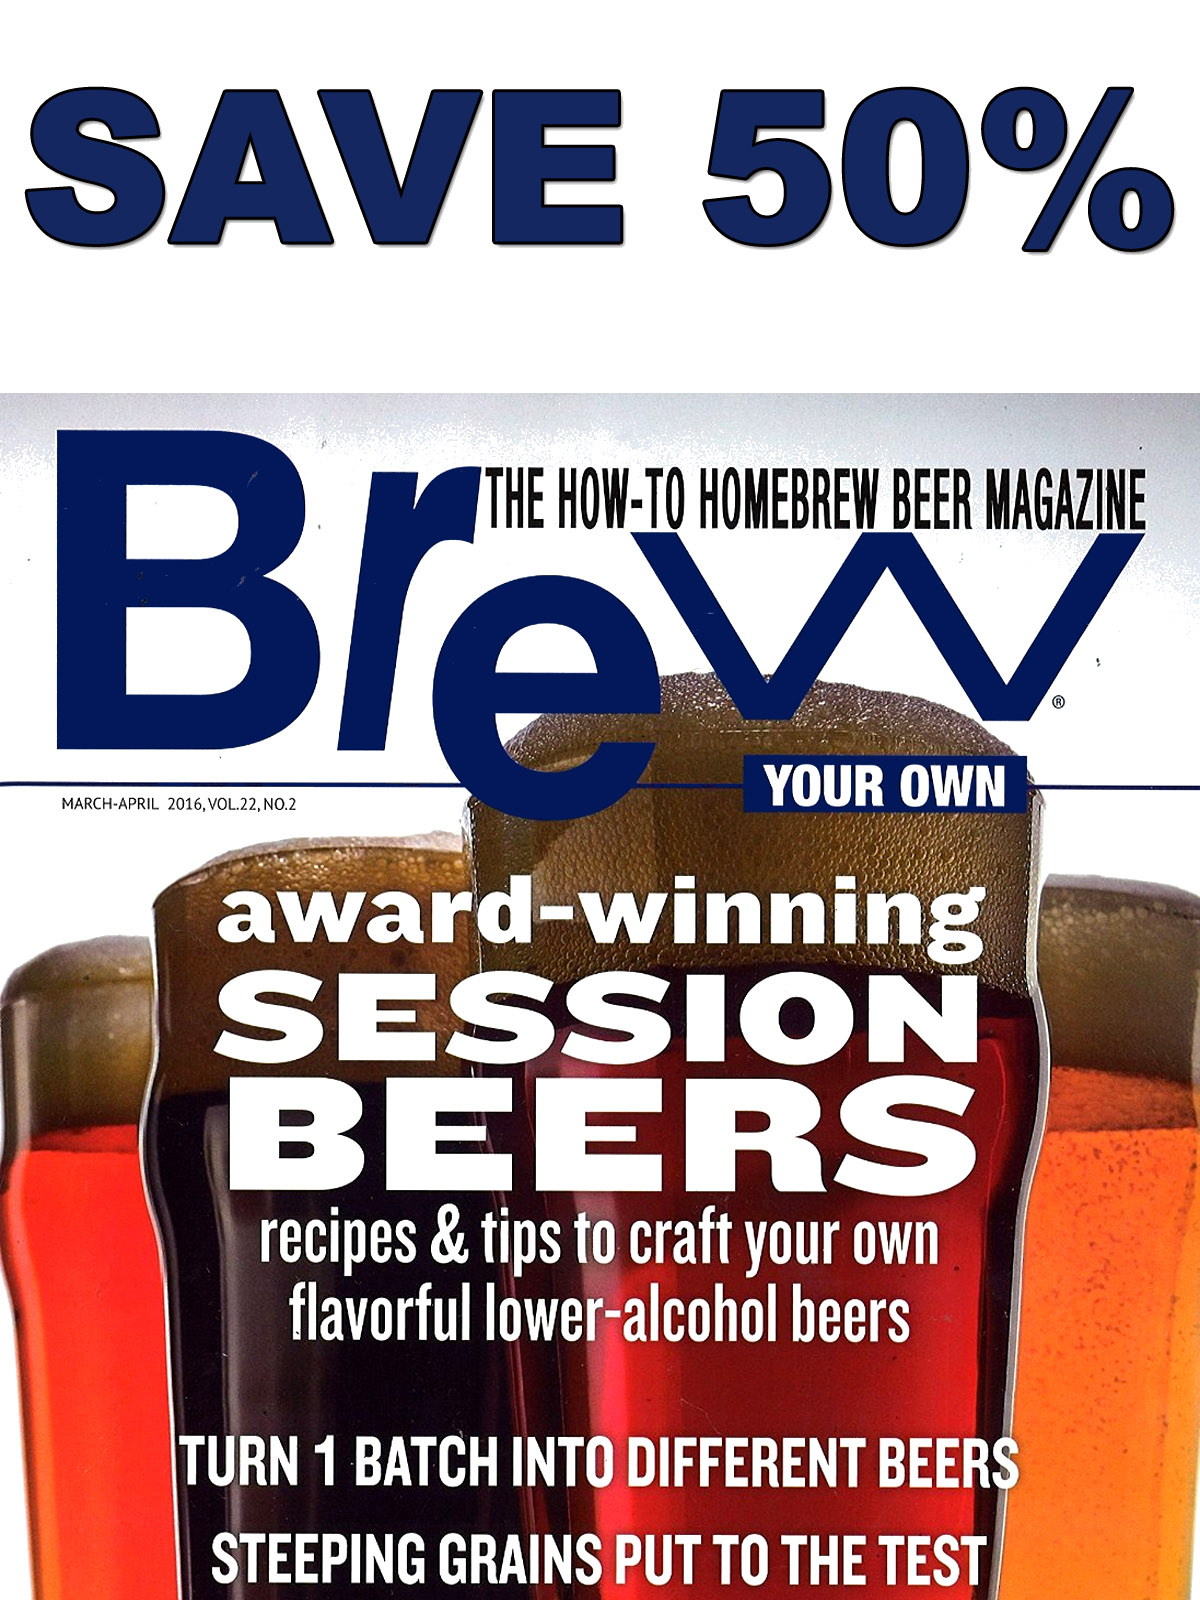  Coupon Code For Save 50% On A Subscription to Brew Your Own Magazine  Coupon Code